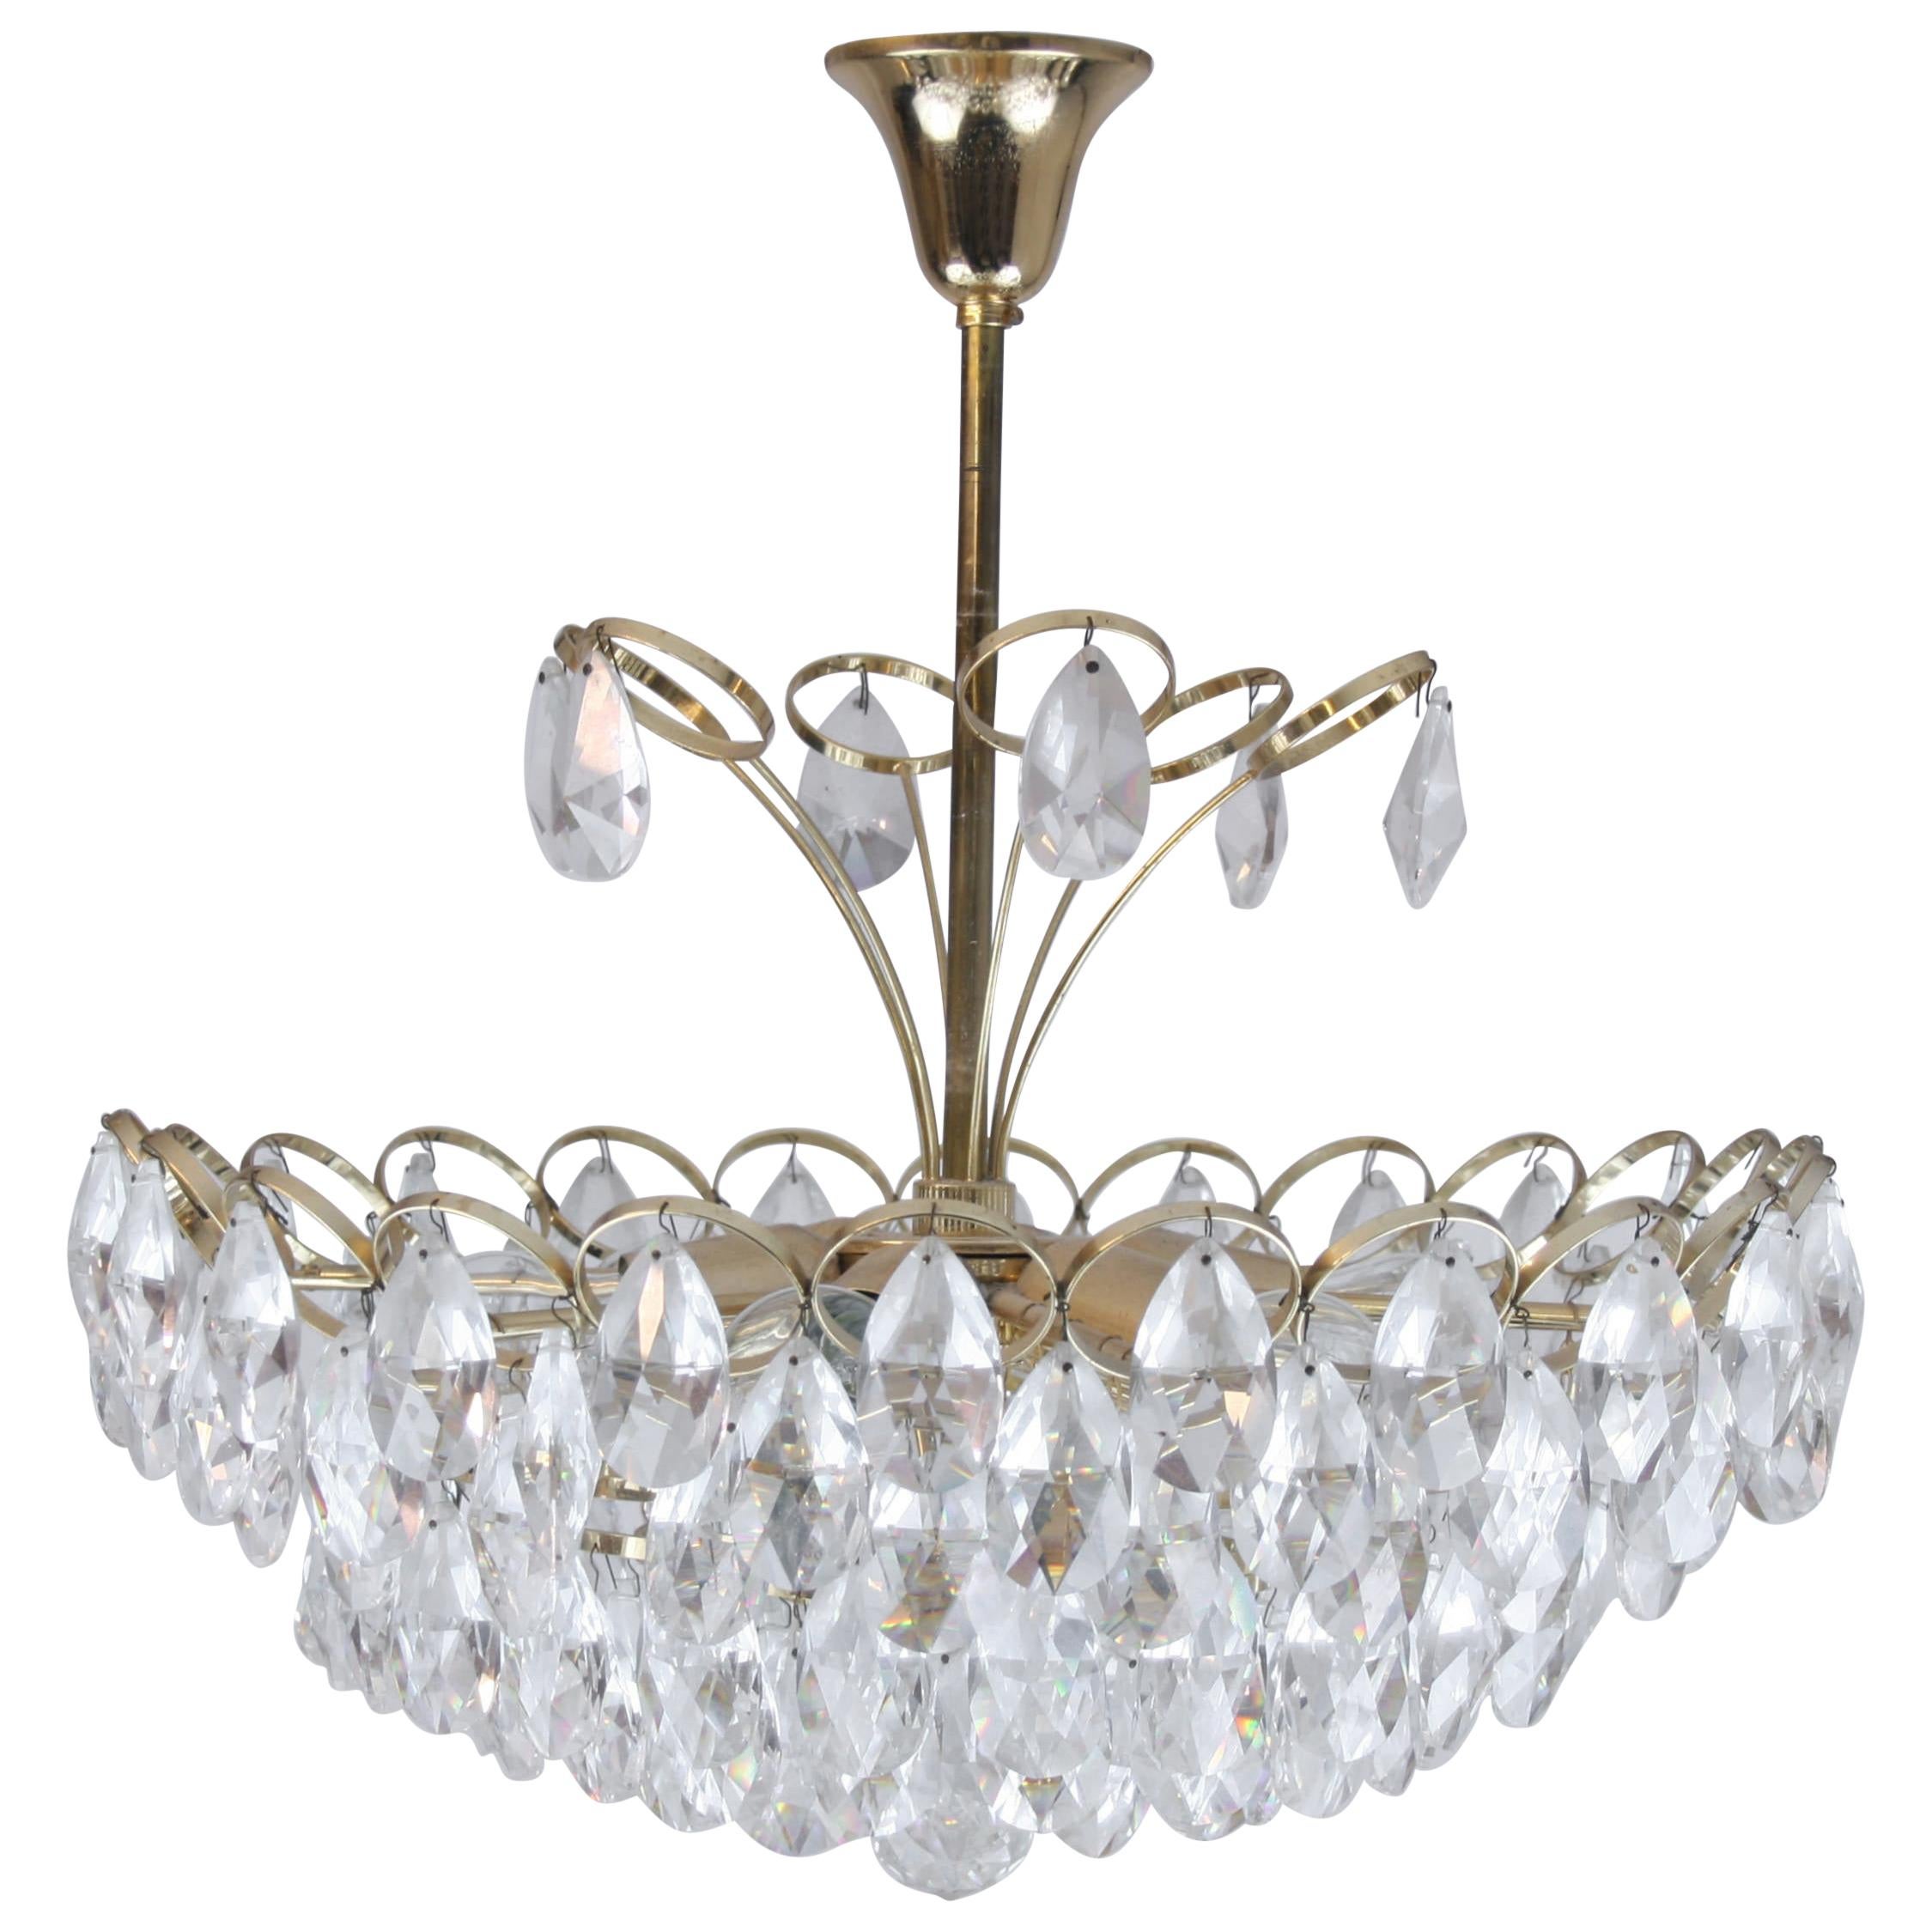 20th Century Guilded Crystal Brass Chandelier by Palwa Large Pendant Lamp